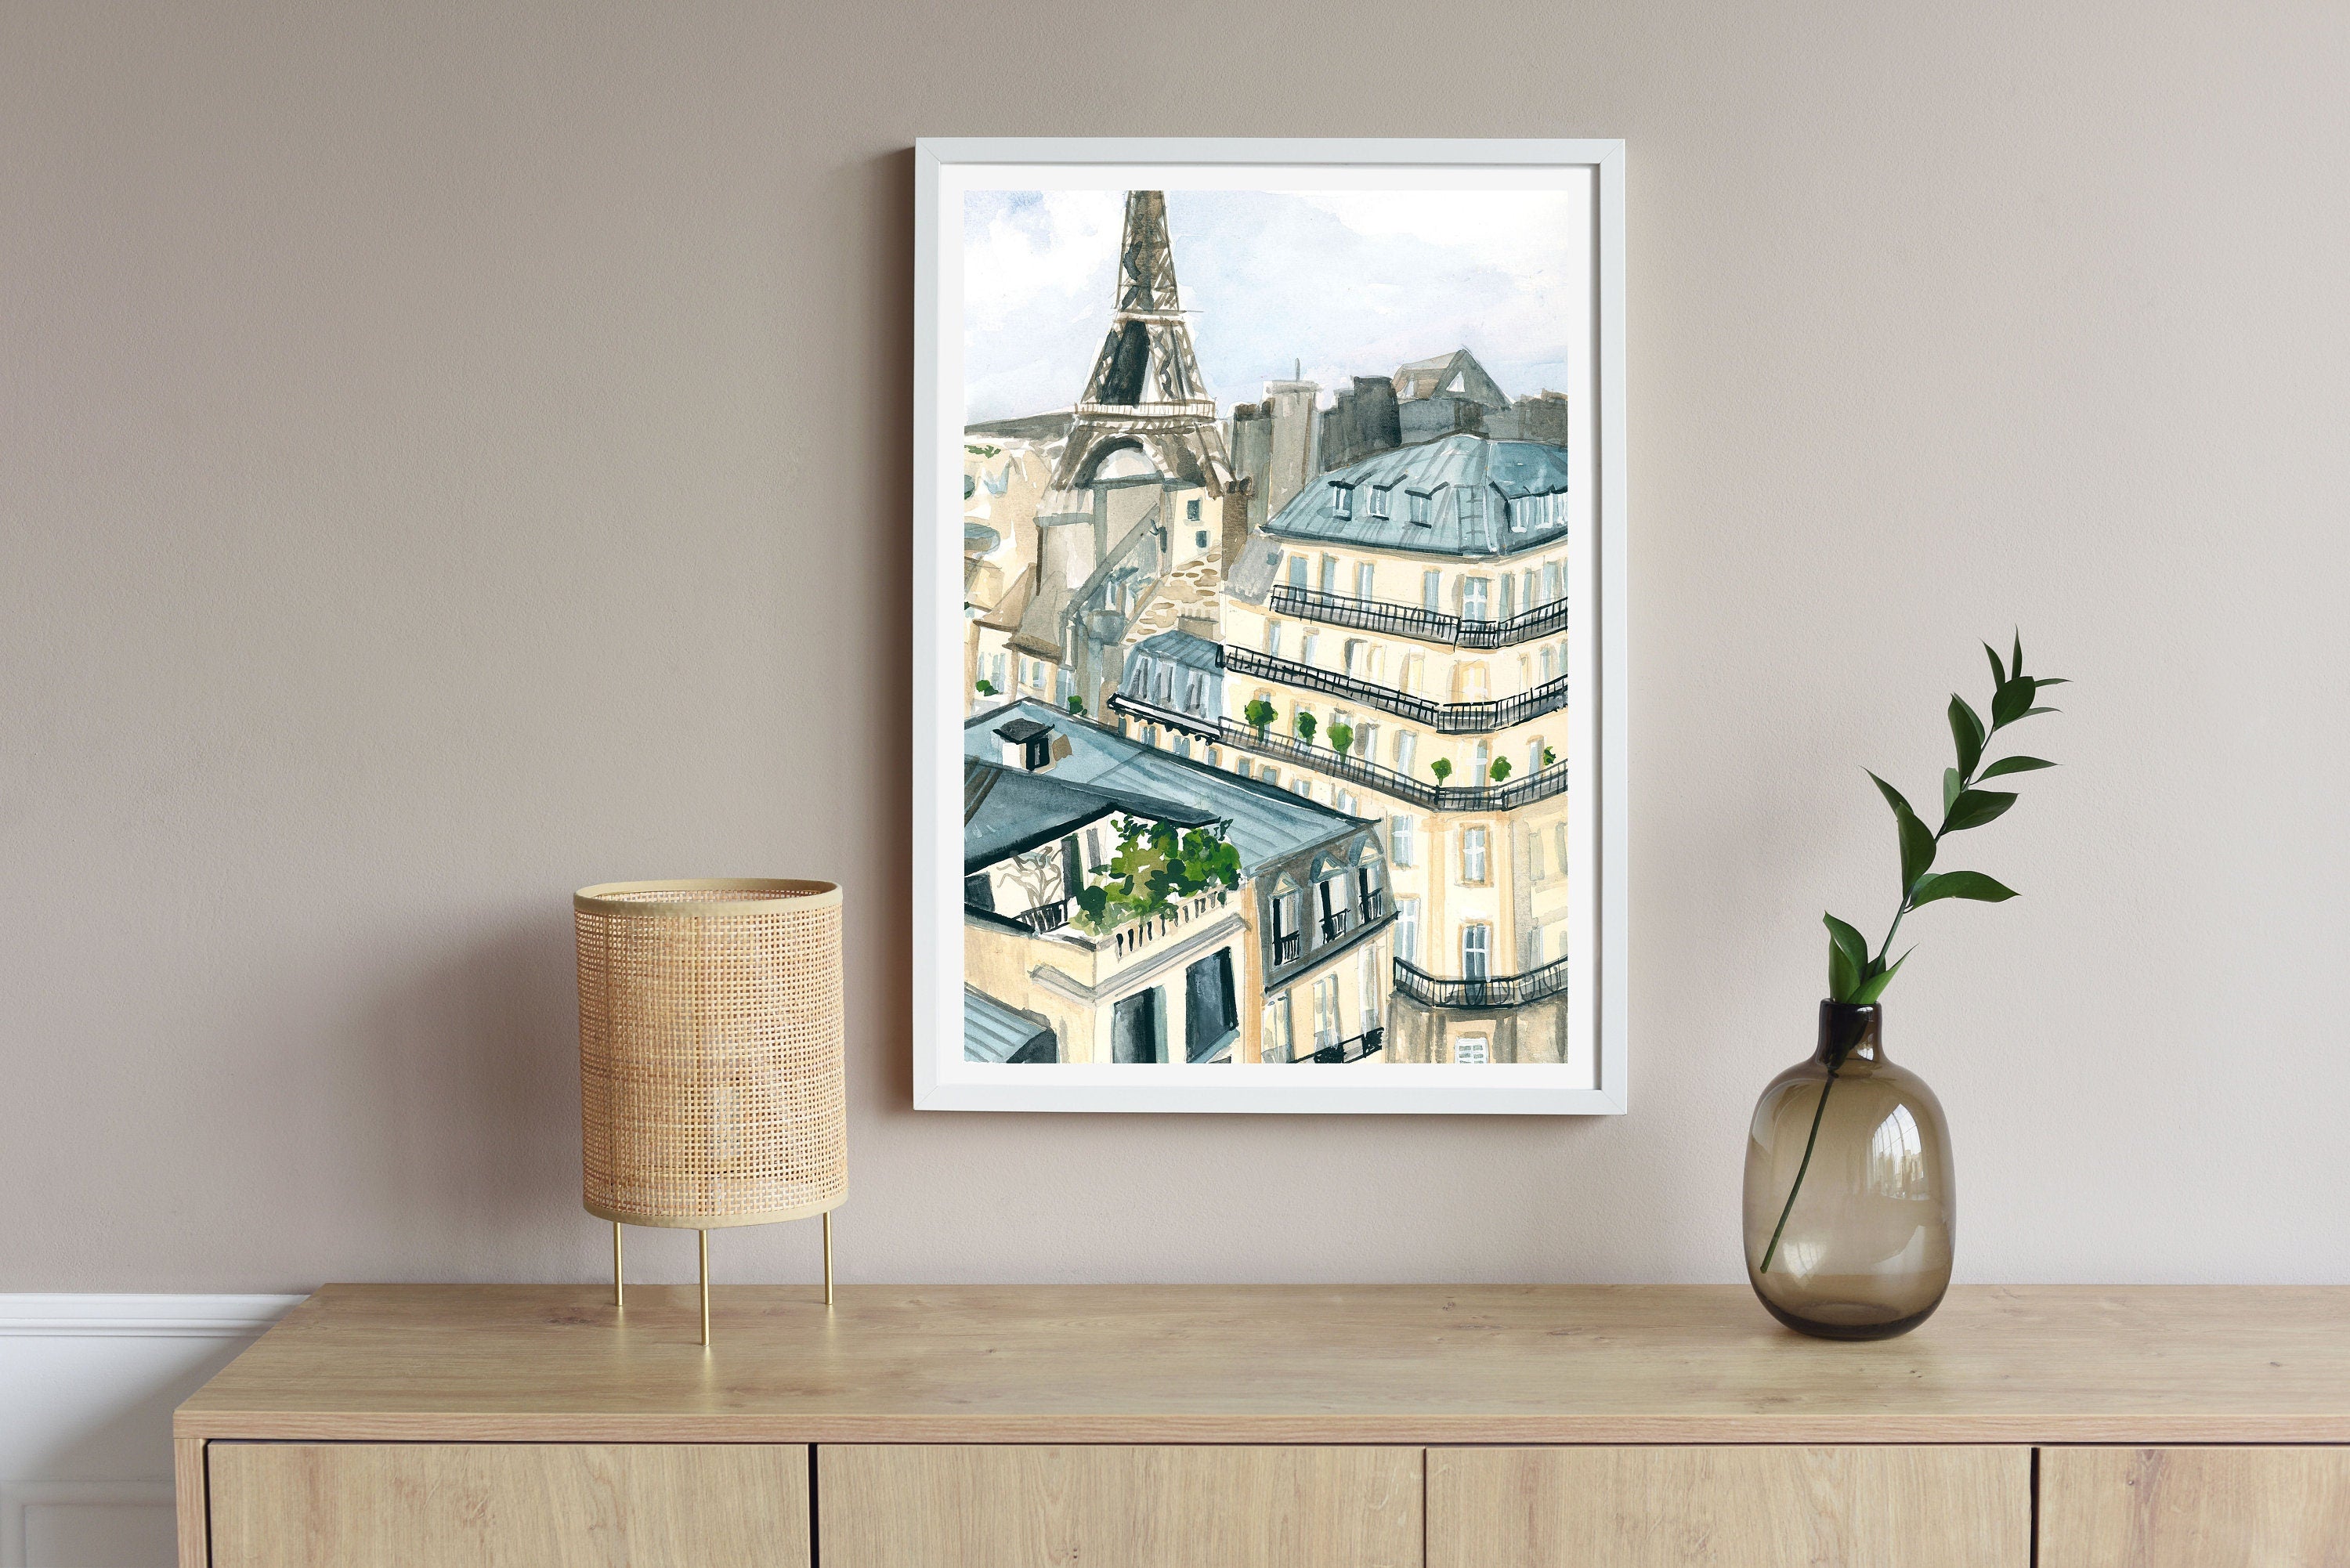 Parisian buildings and Eiffel tower print of painting by Medjool Studio. Print of original gouache painting based on the artist's own travels to Europe detailing historic architecture and the Eiffel tower.